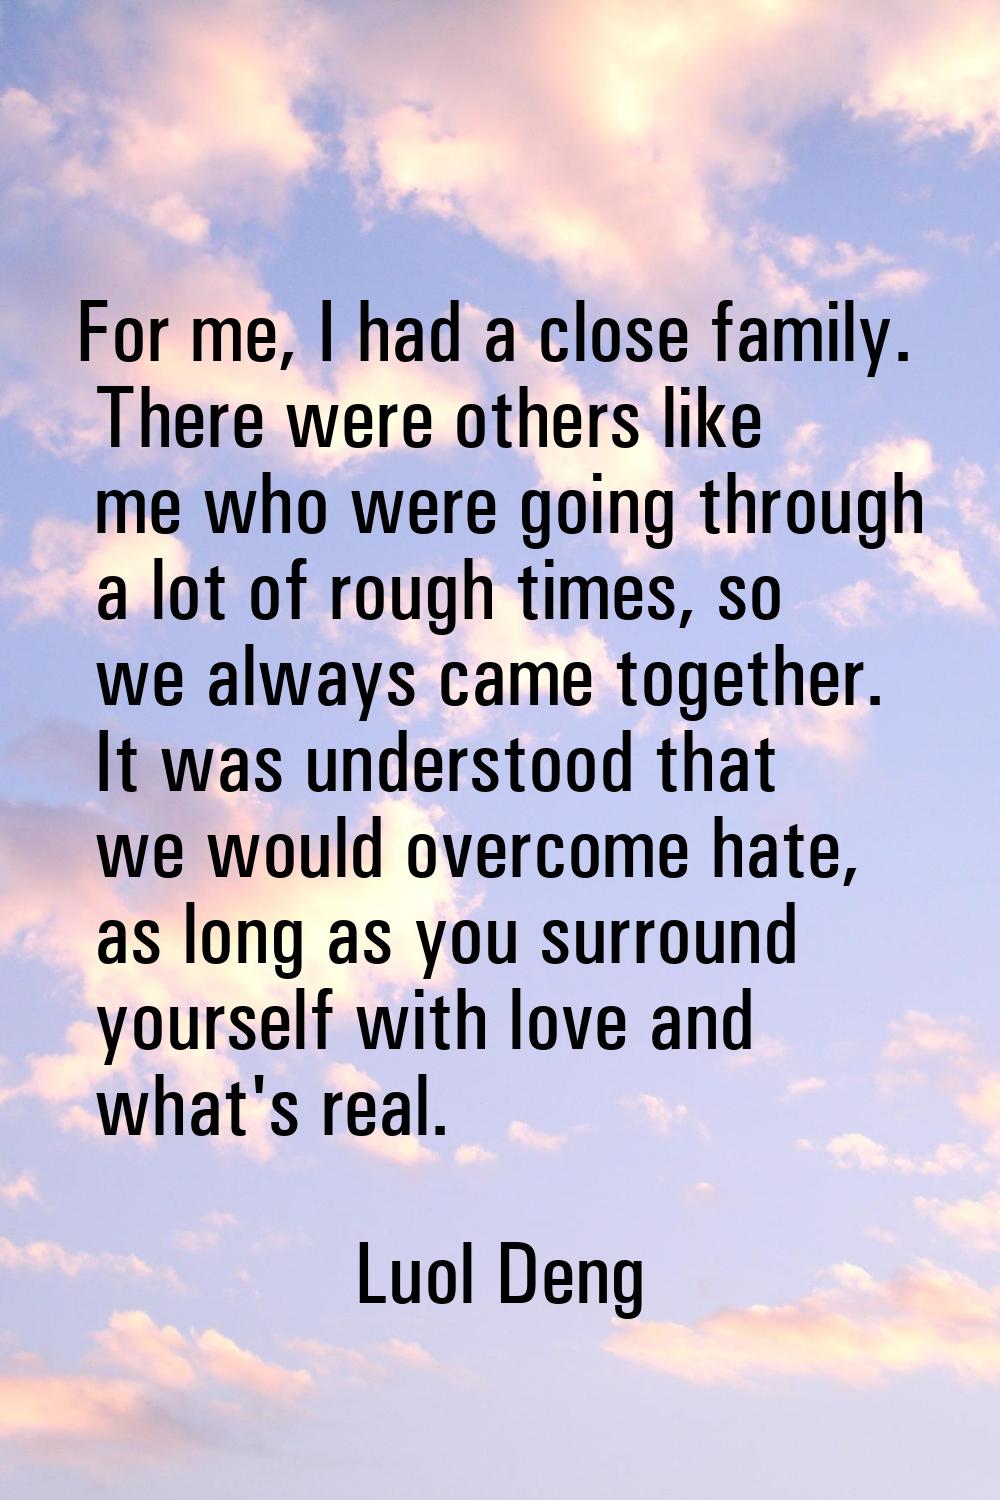 For me, I had a close family. There were others like me who were going through a lot of rough times